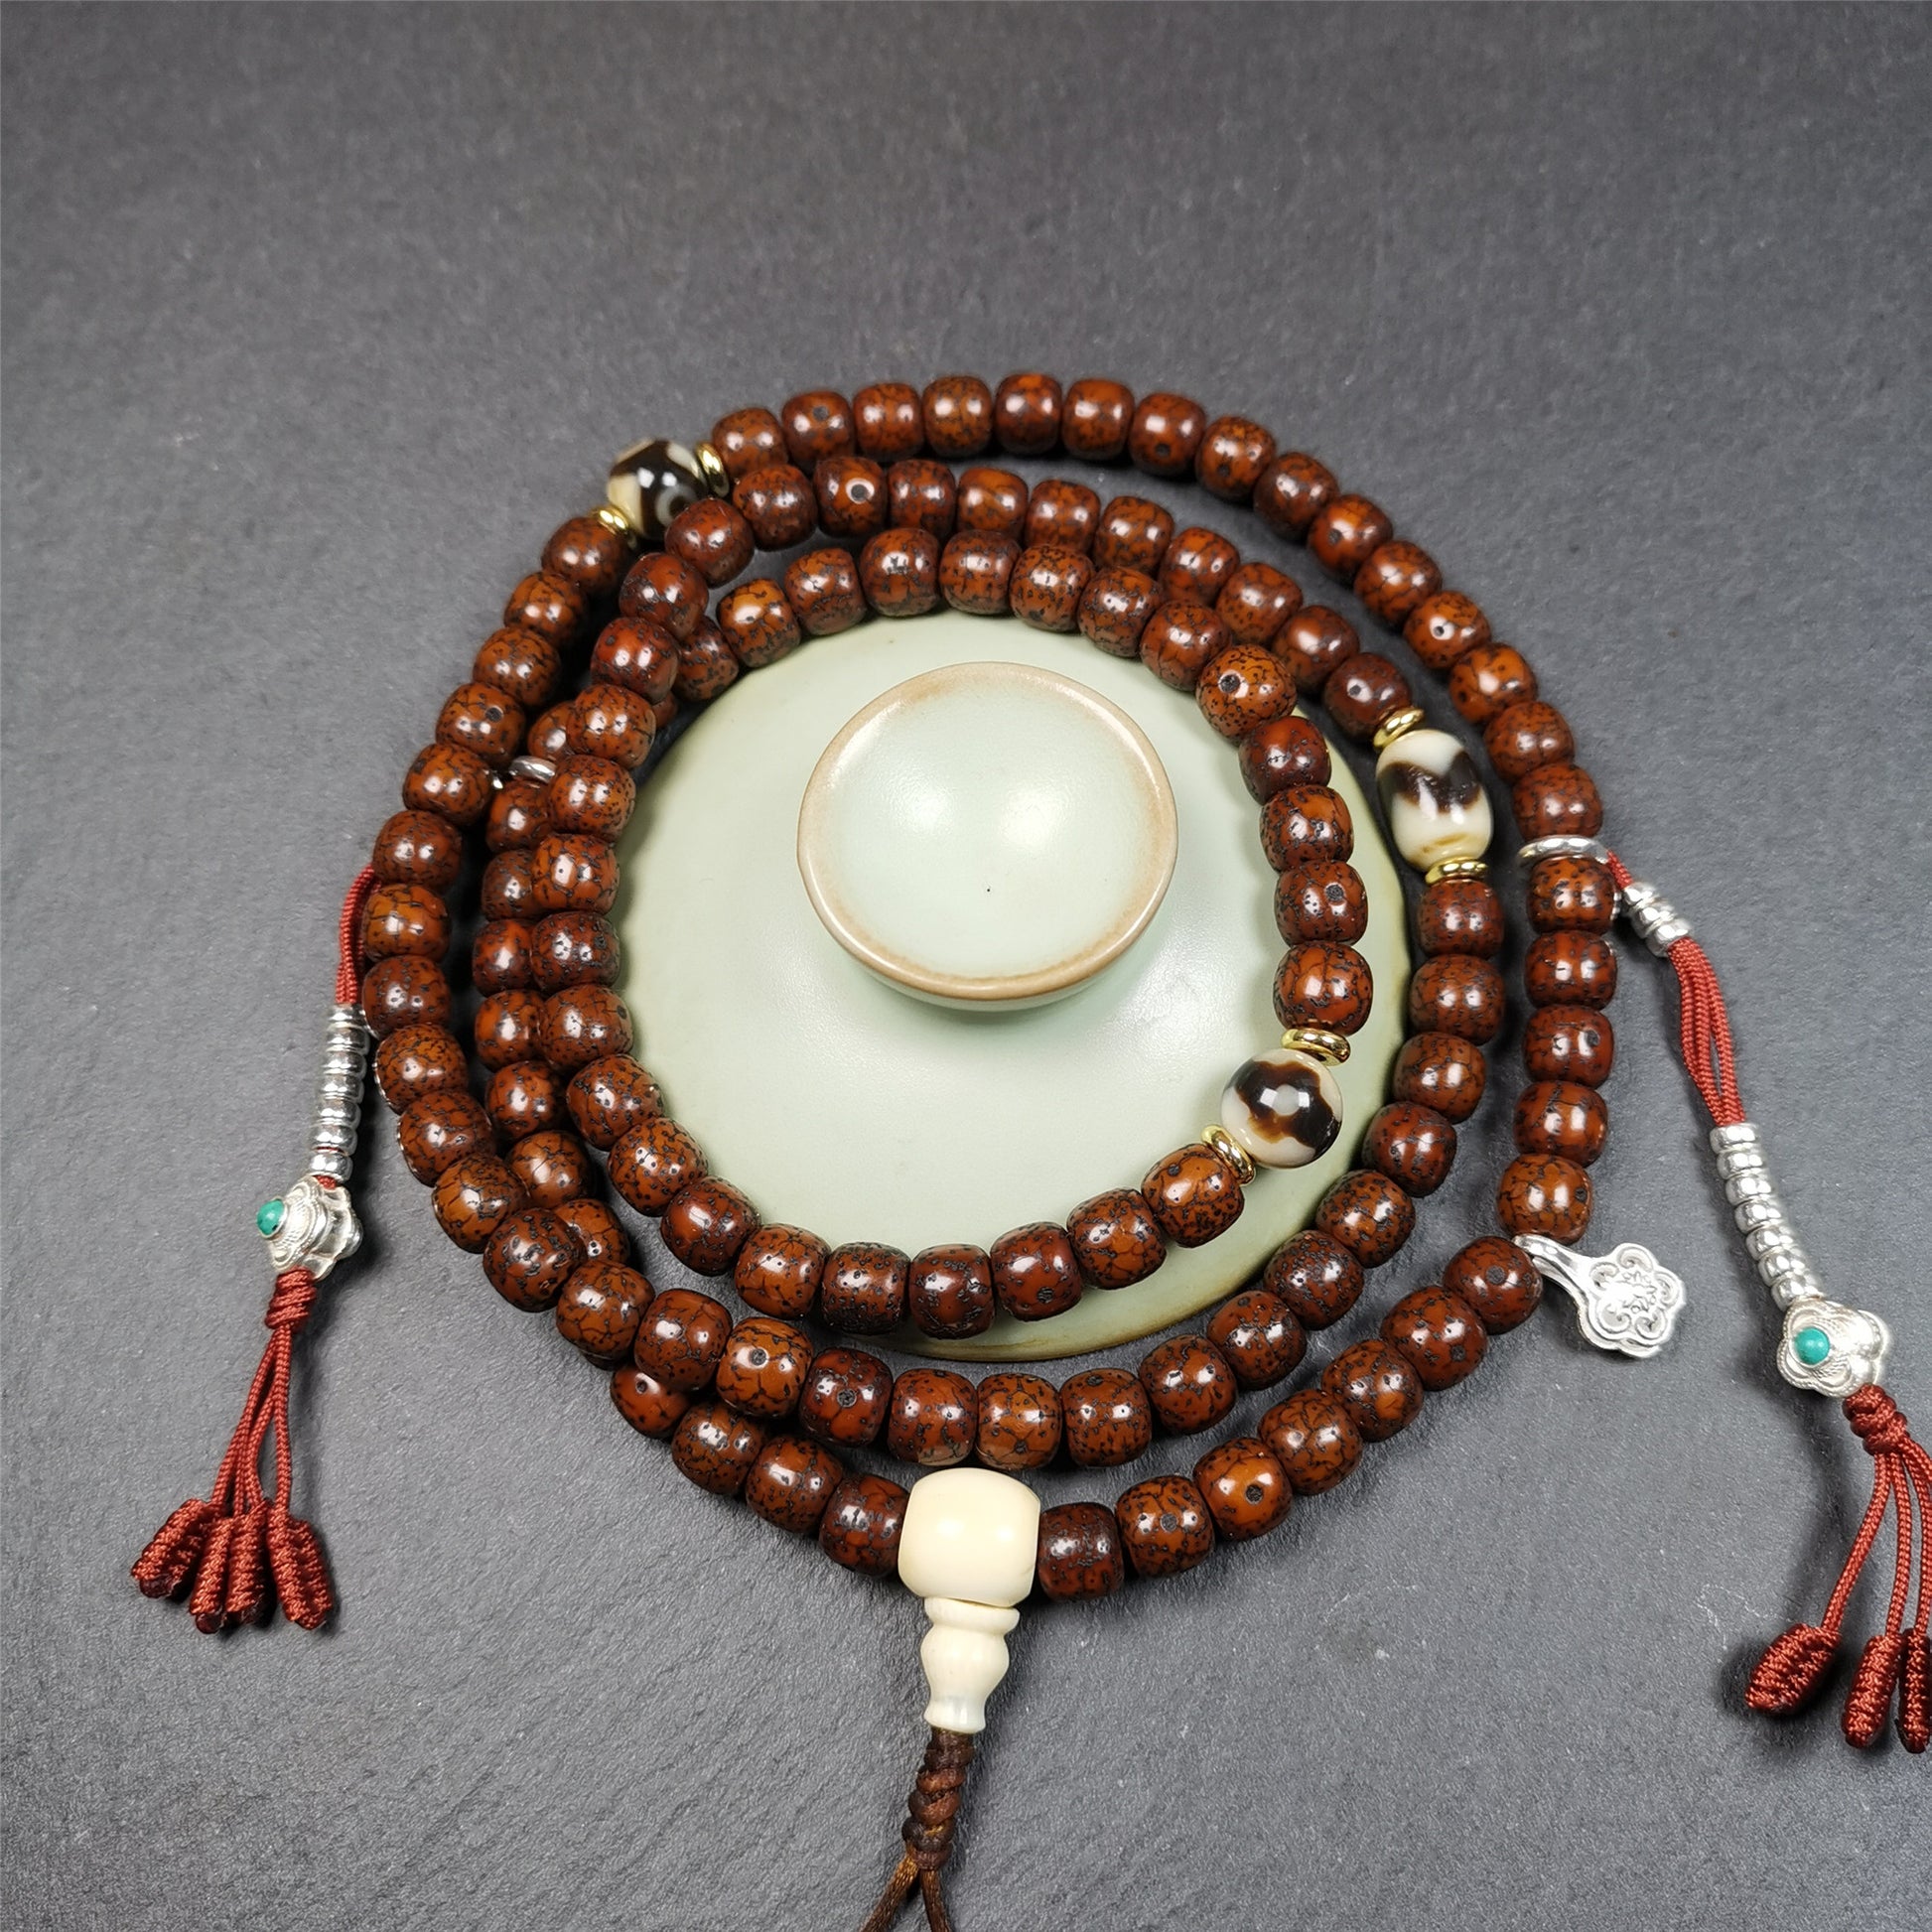  This old lotus seed mala was handmade from tibetan crafts man in Baiyu County,about 30 years old. It's composed of 108 lotus seed beads,then add some dzi beads,1 pair of silver bead counters,and ivory guru bead on i